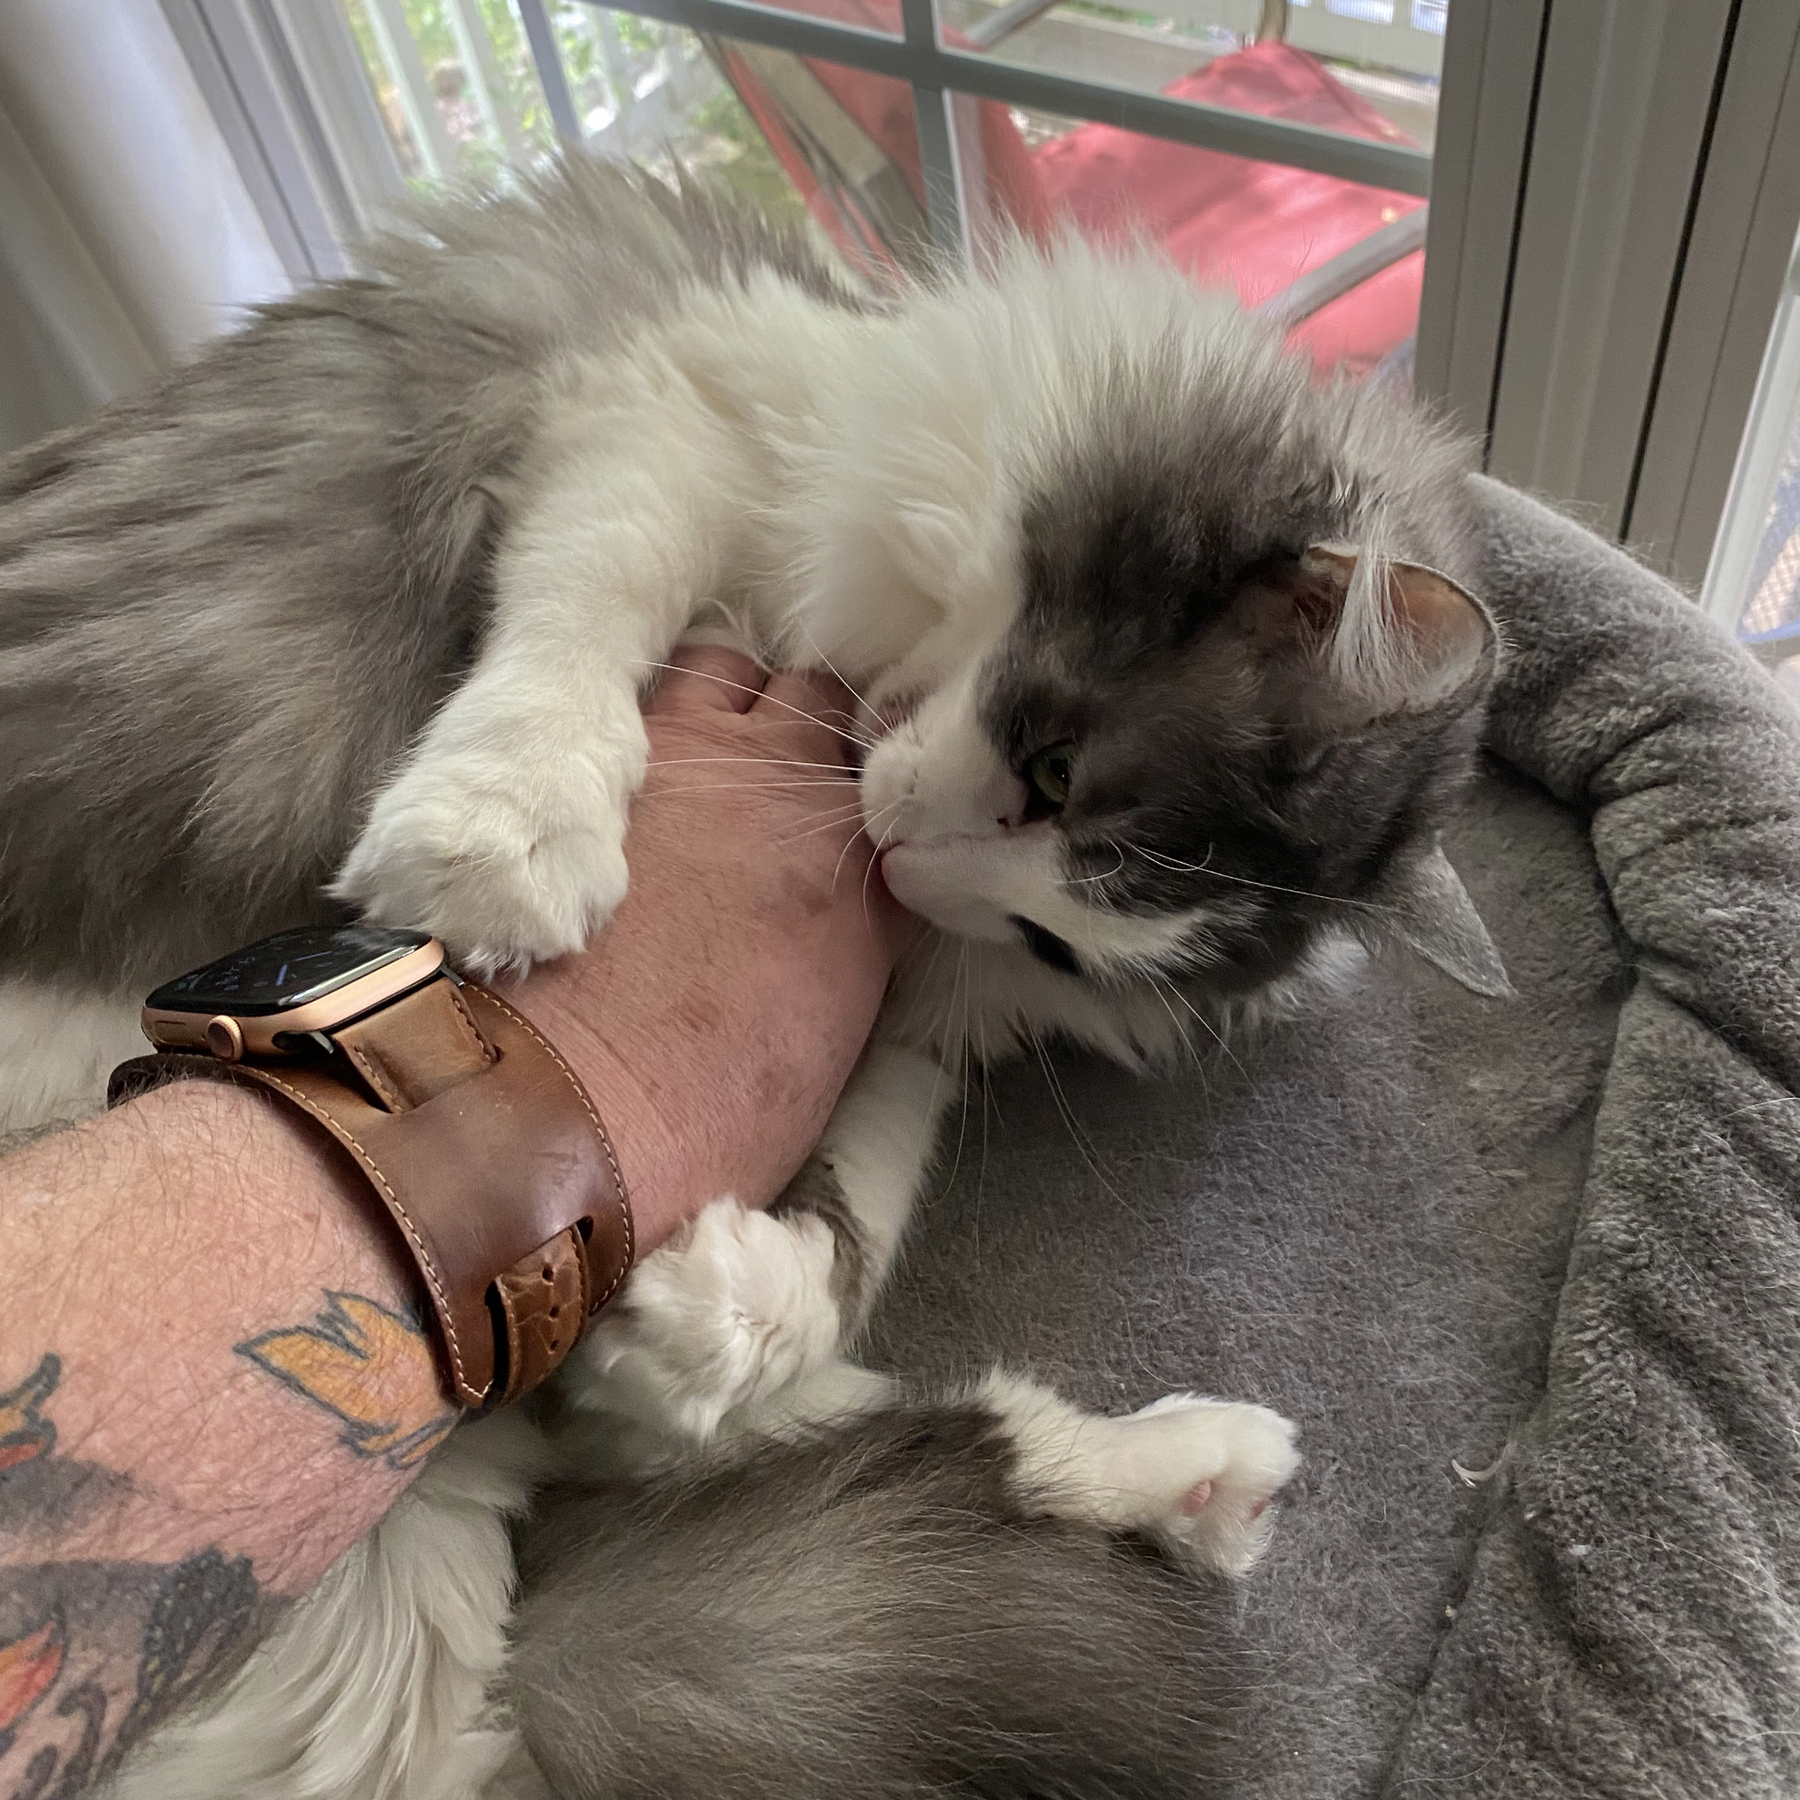 Gray and white kitty attacking my hand after I rubbed her belly.